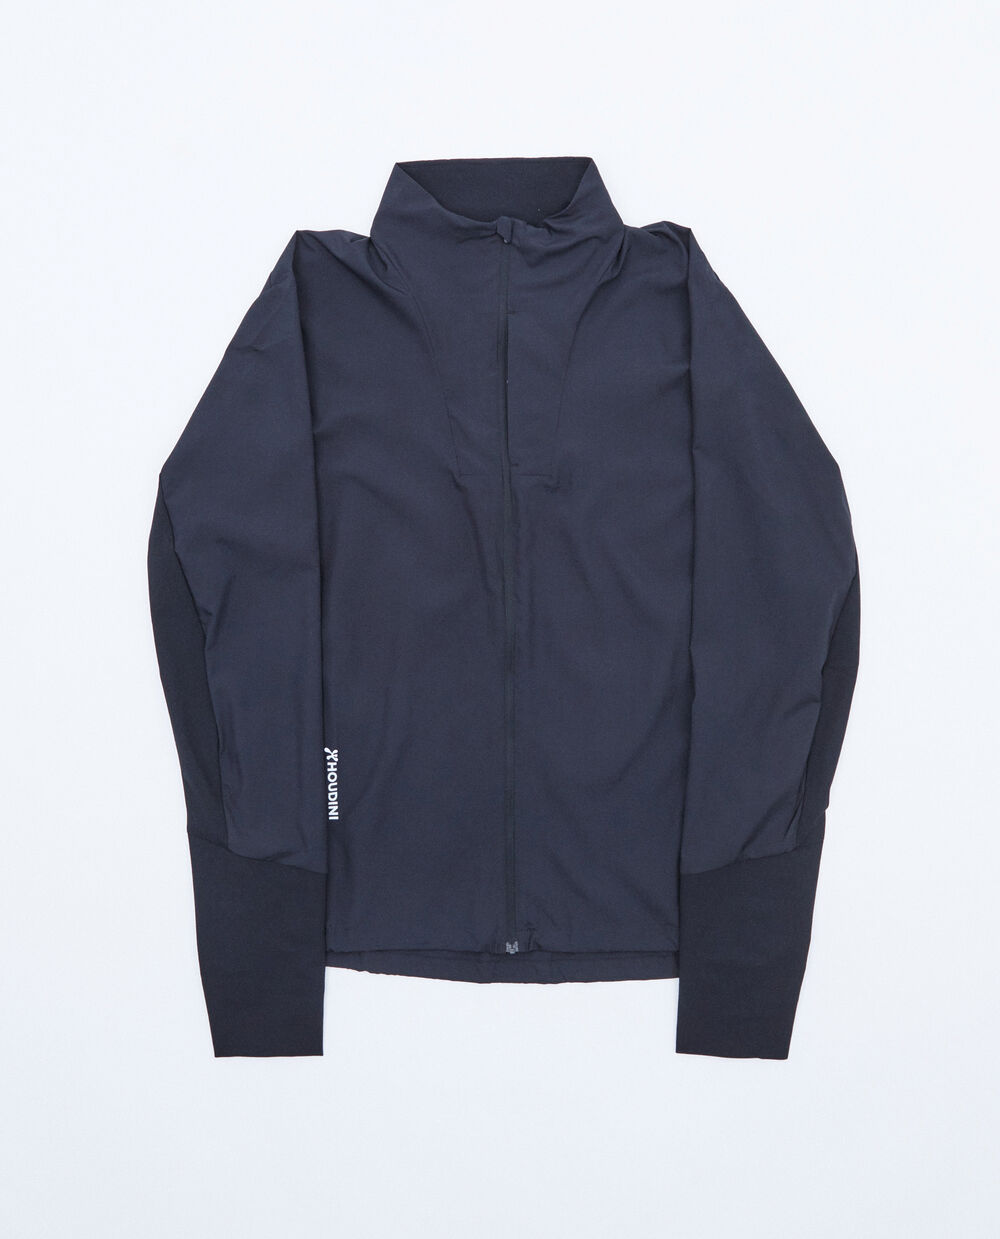 HOUDINI M'S PACE WIND JACKET